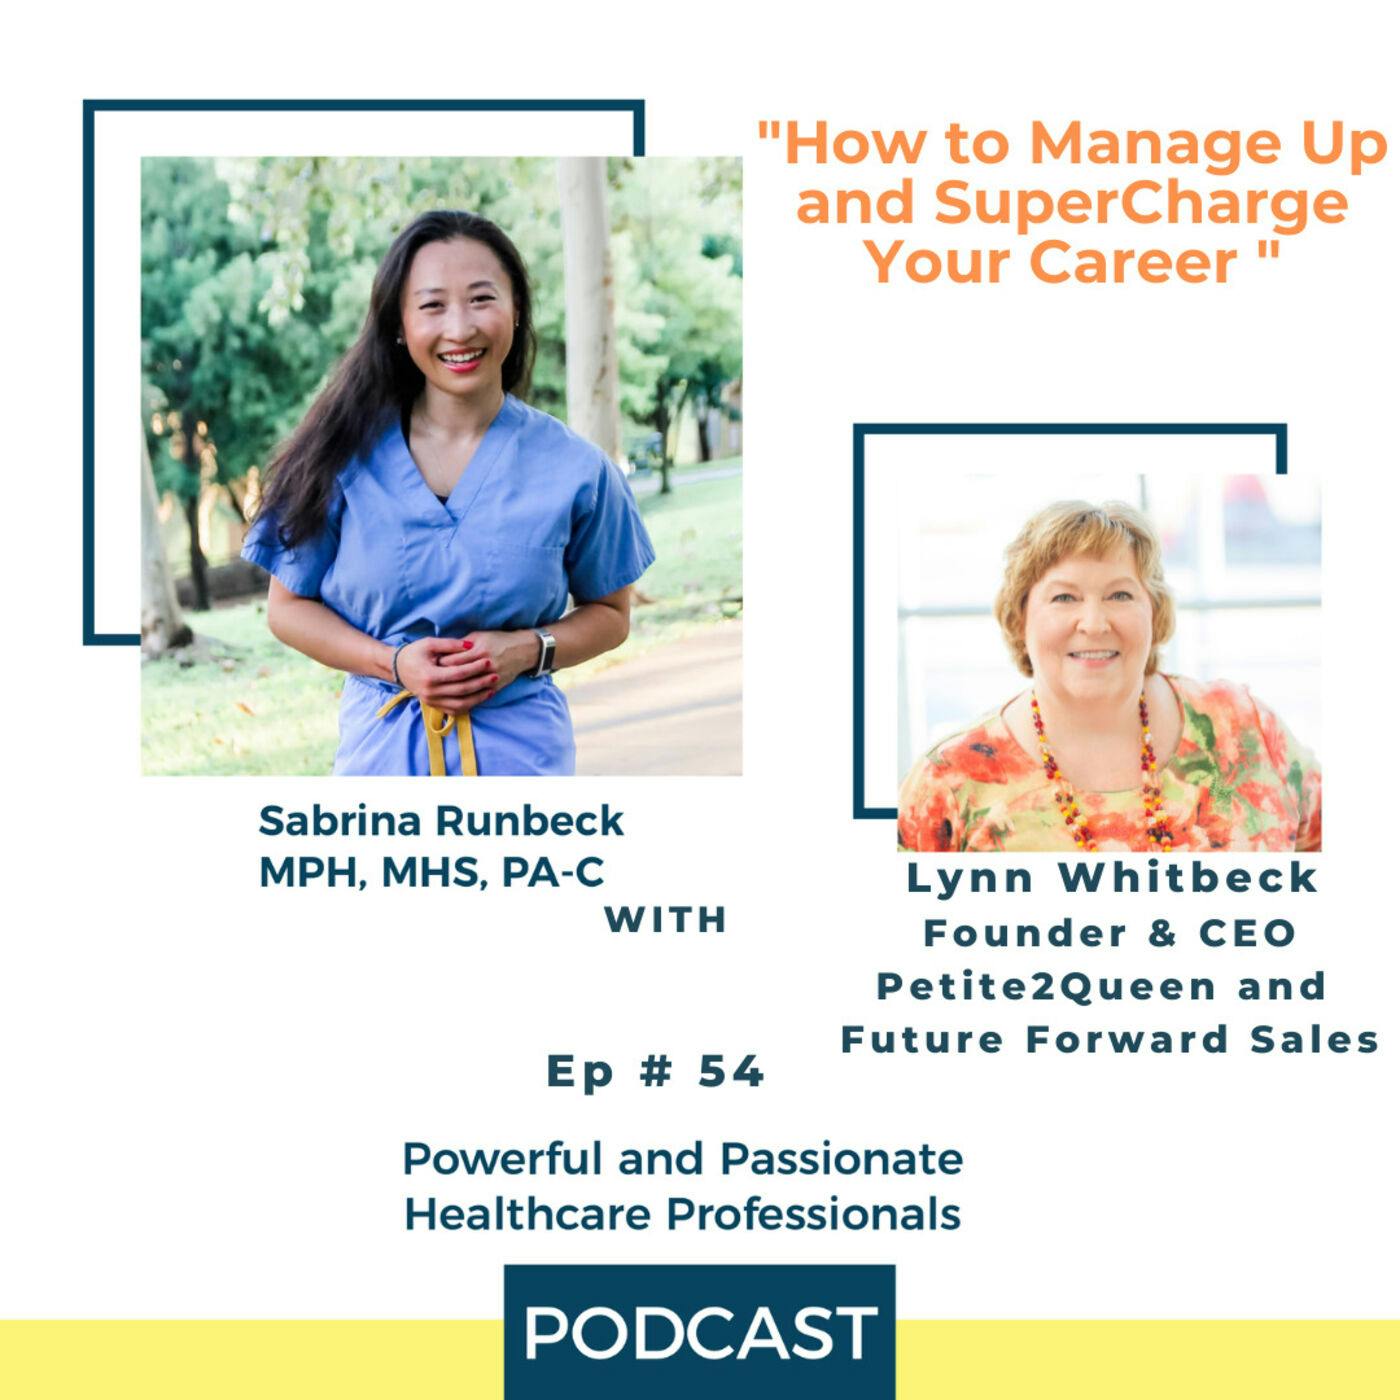 Ep 54 – How to Manage Up and Supercharge Your Career with Lynn Whitbeck